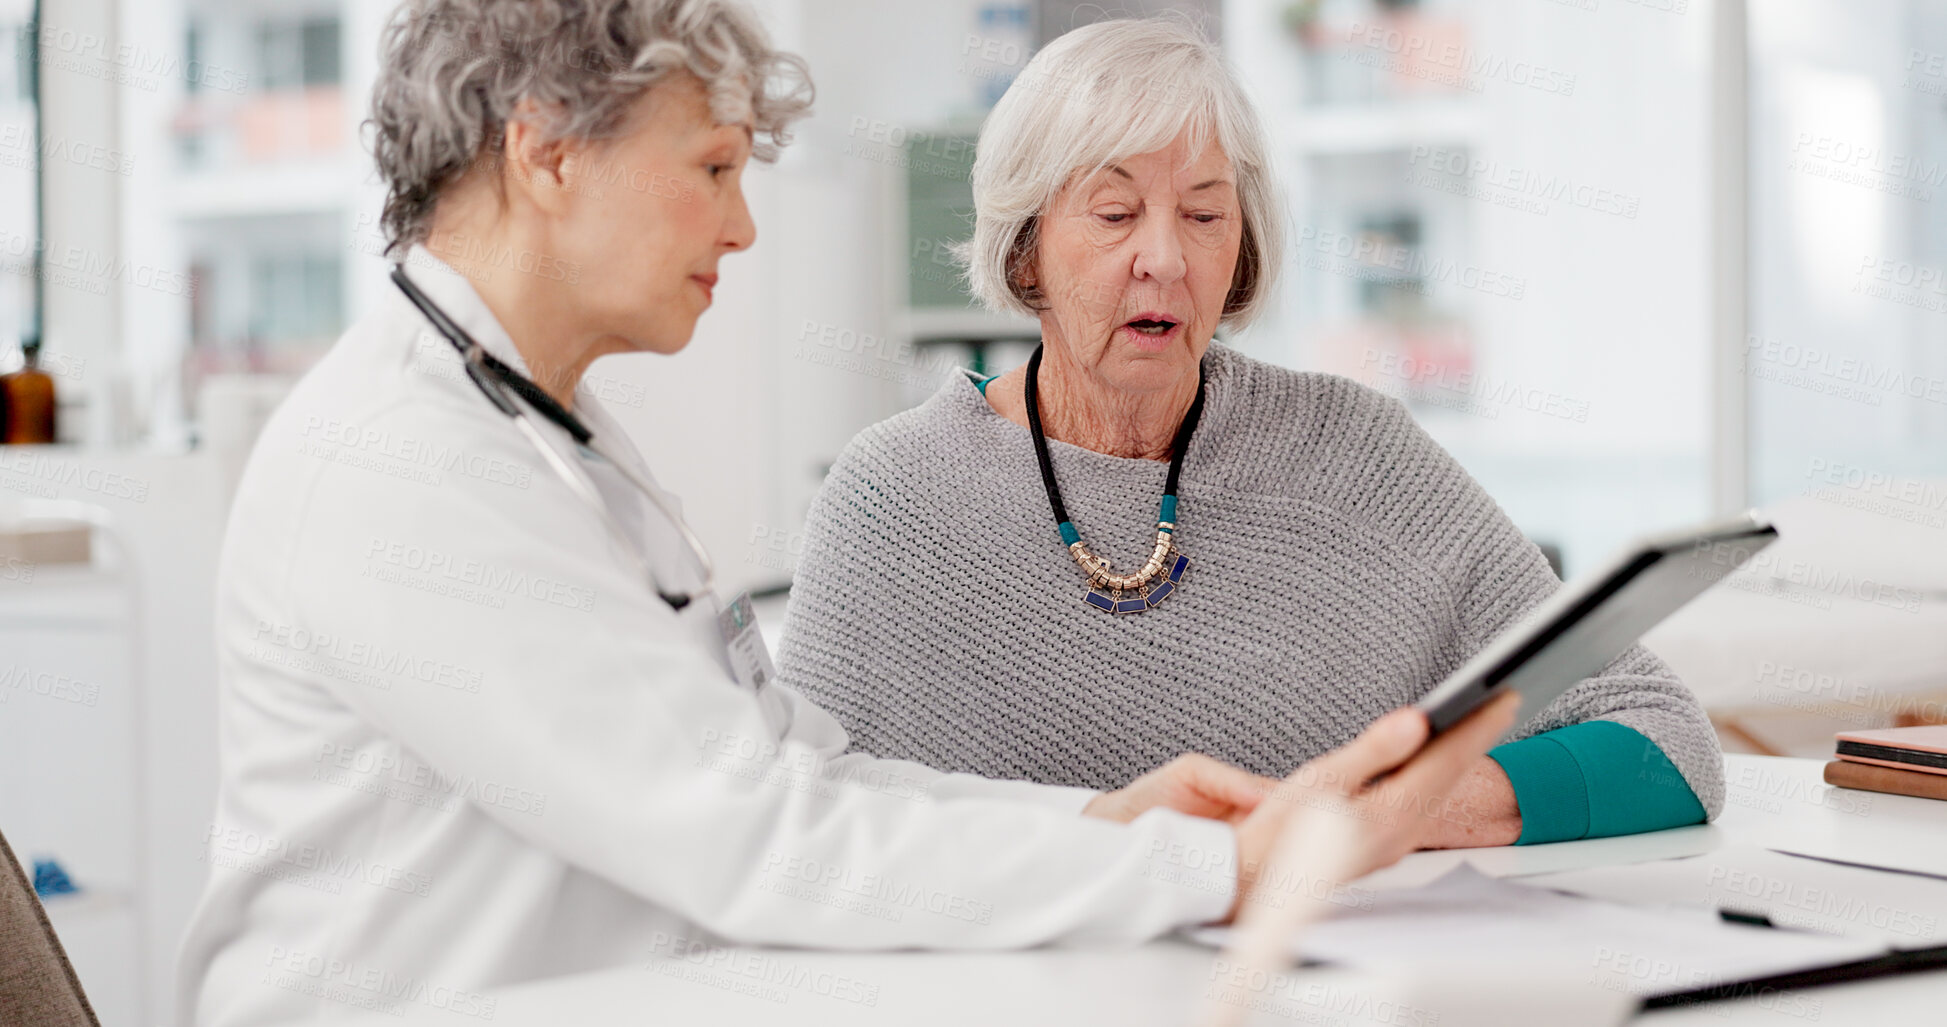 Buy stock photo Senior doctor, tablet and consulting patient for healthcare advice, prescription or diagnosis at hospital. Mature medical professional talking to elderly female person on technology for consultation